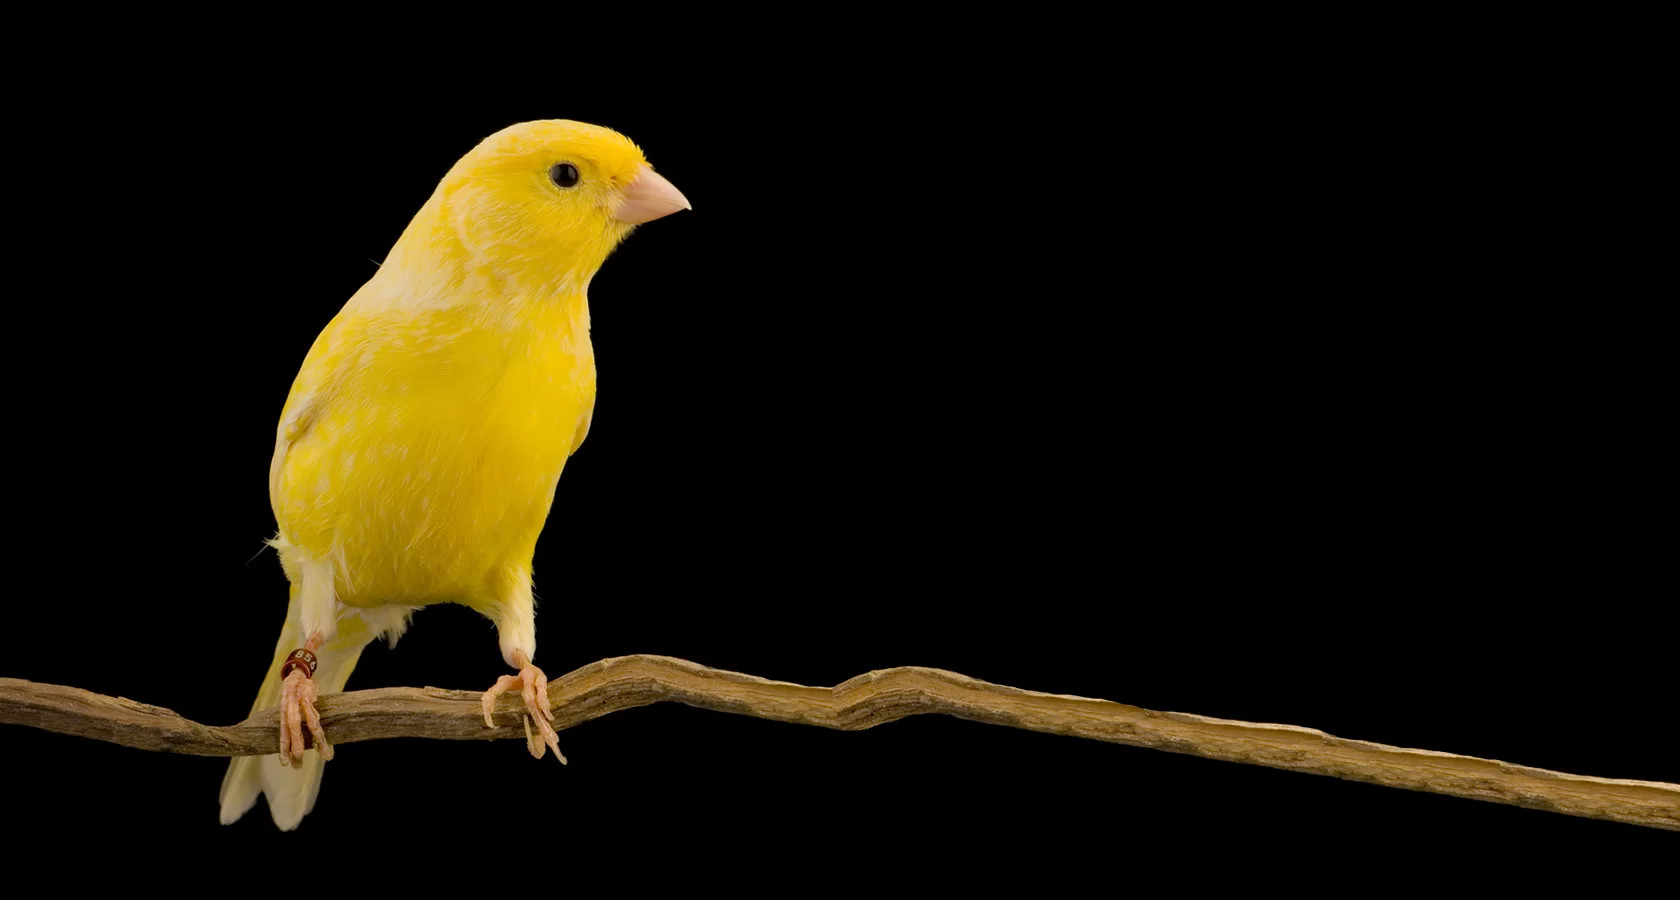 canary tokens